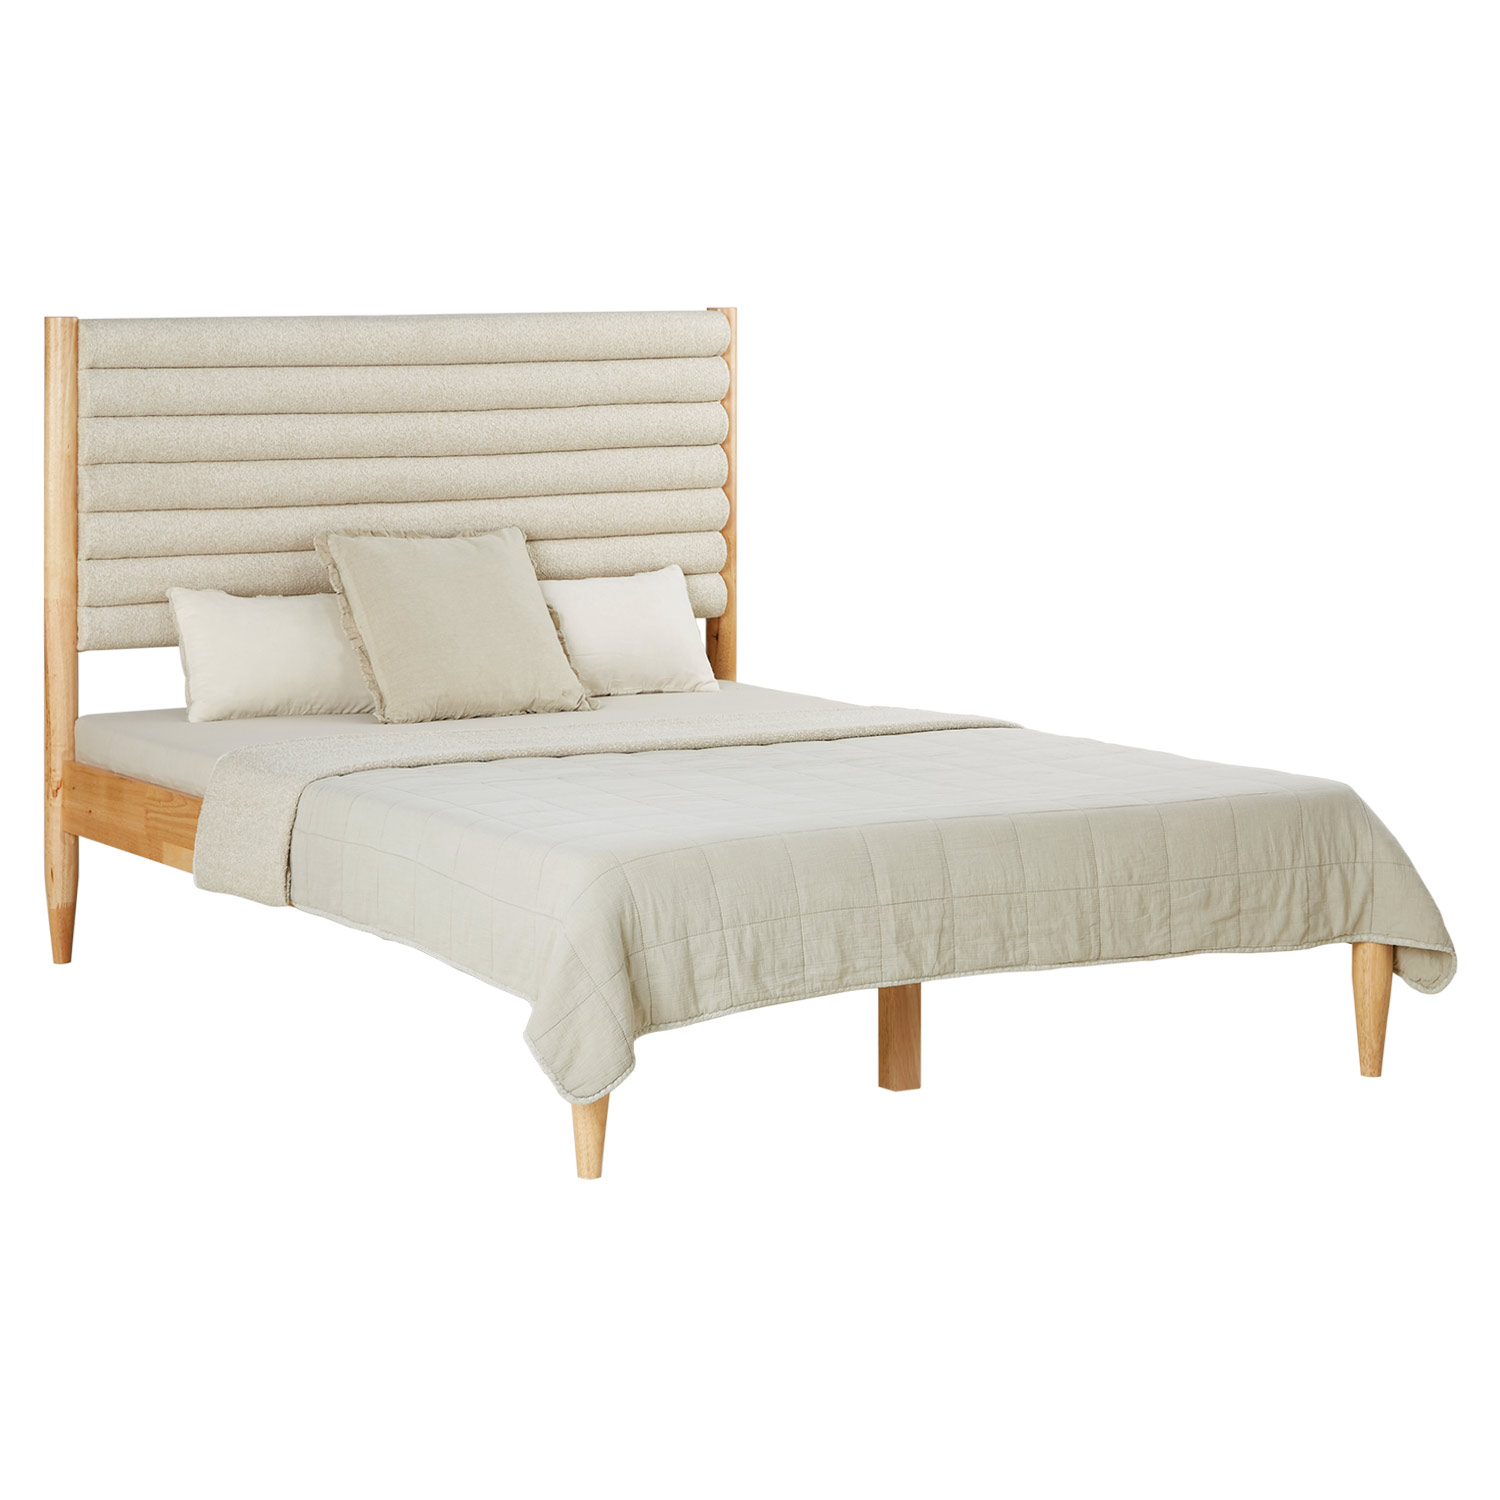 Small Double Bed 140x200 cm Wooden Bed Bouclé Beige Upholstered Bed with Slatted Frame Fabric Bed Frame